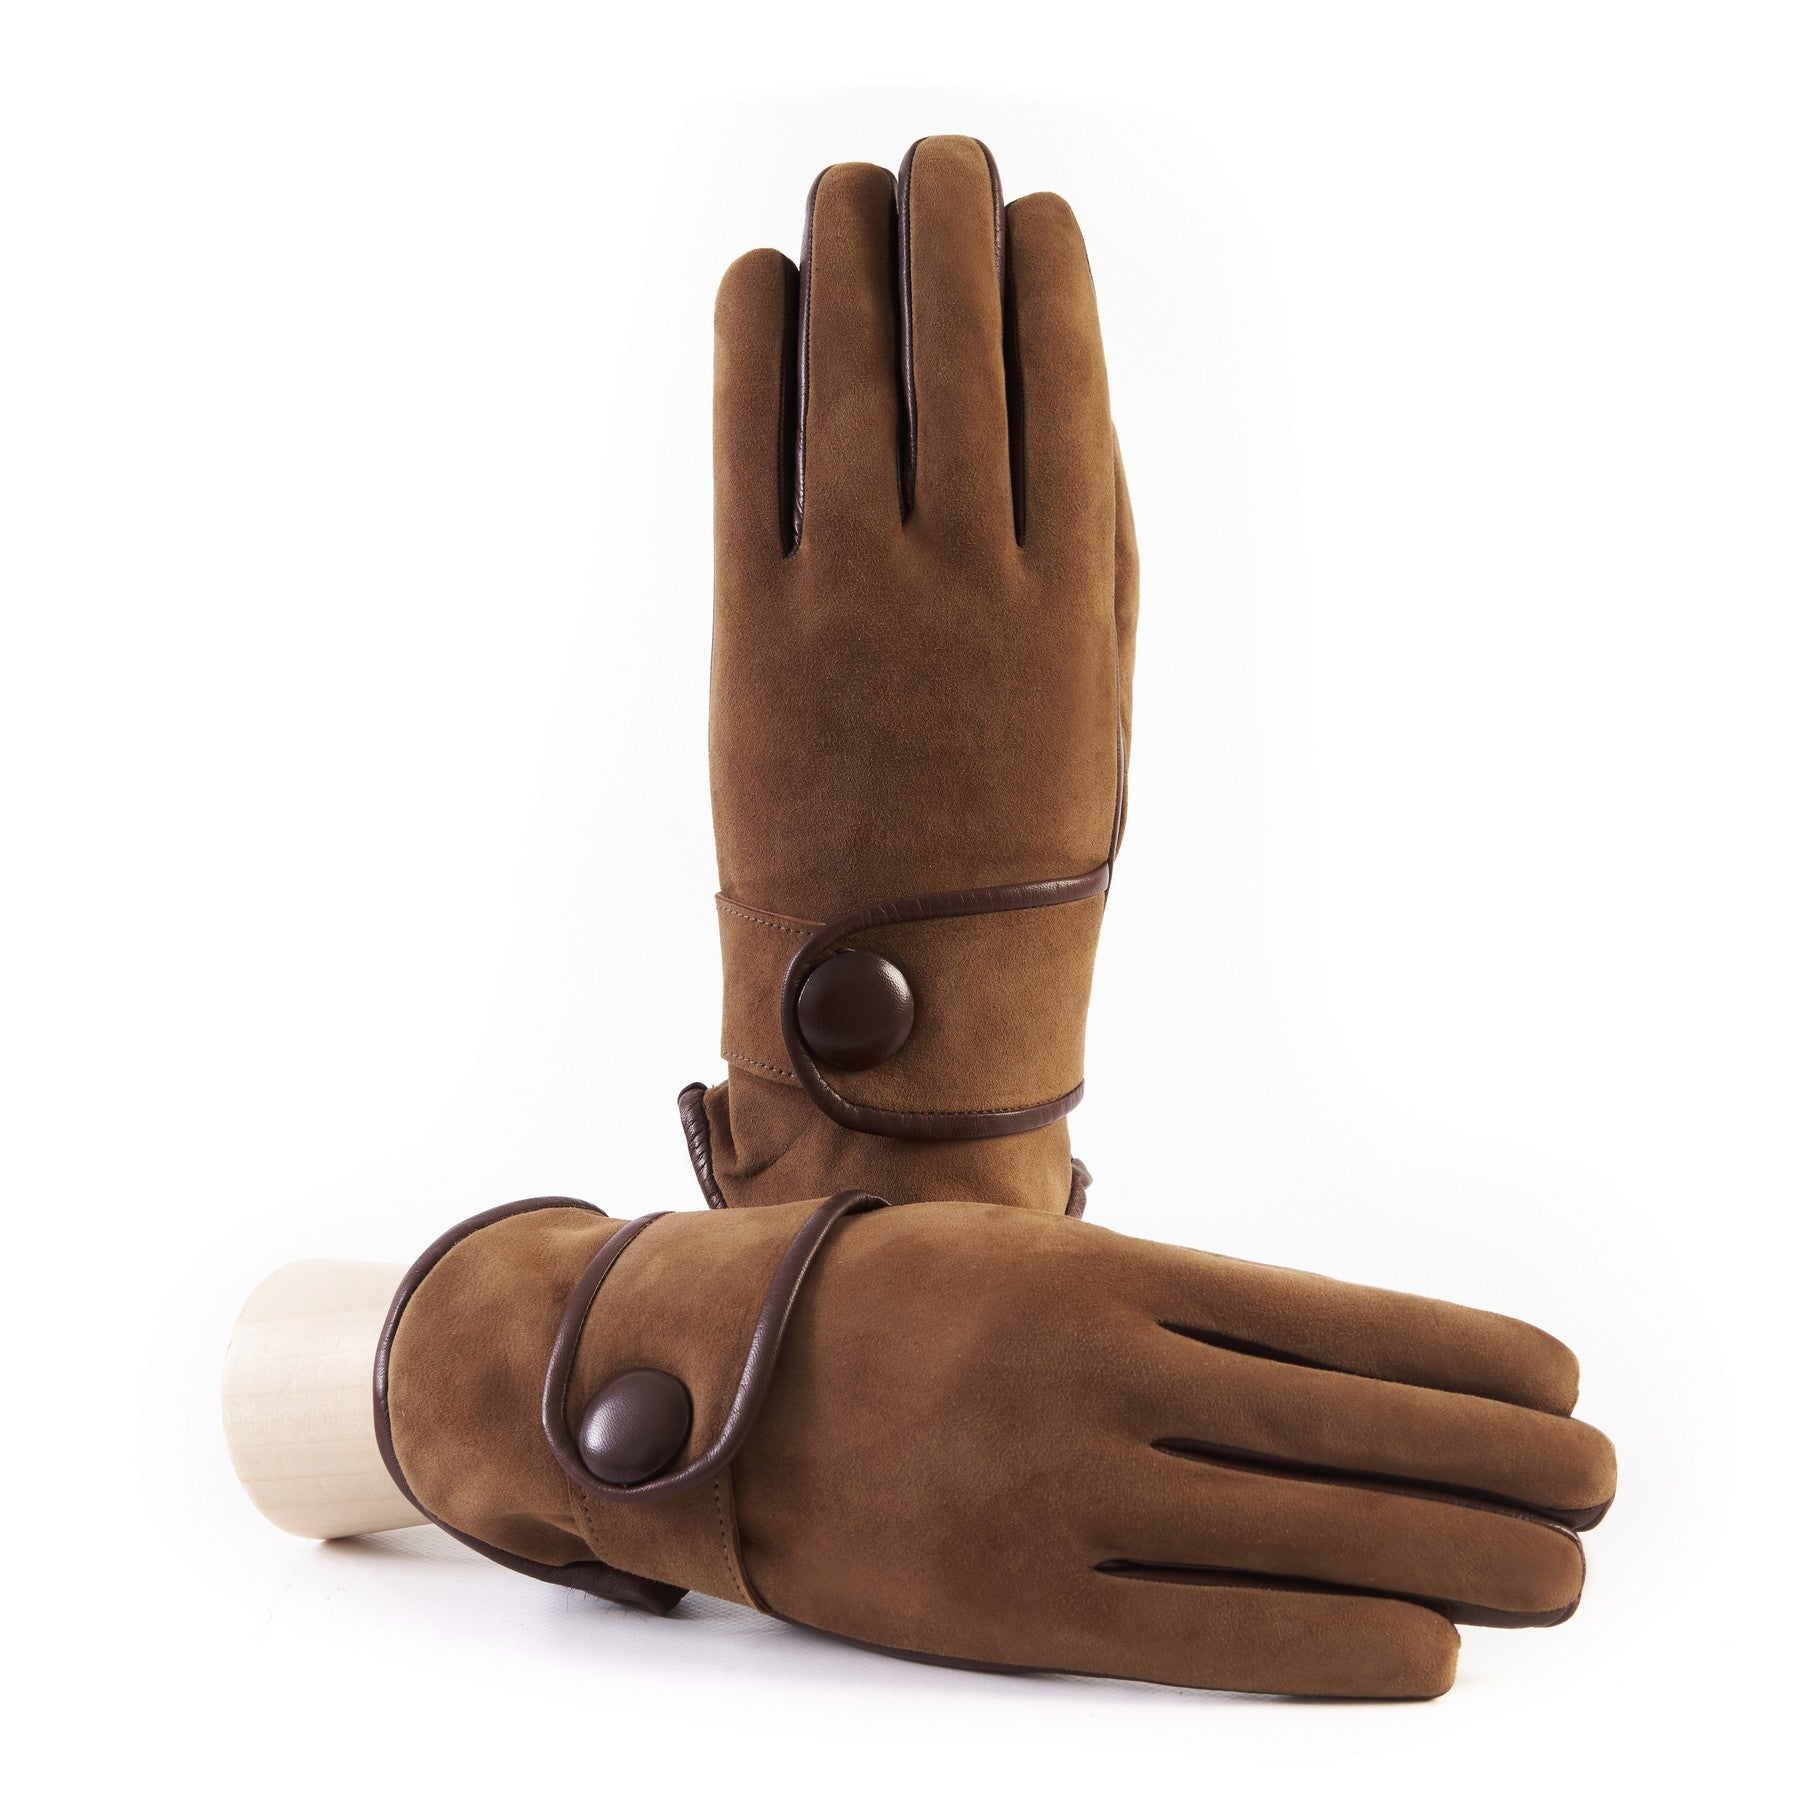 Men's tobacco nappa and suede leather gloves with button and real fur lining